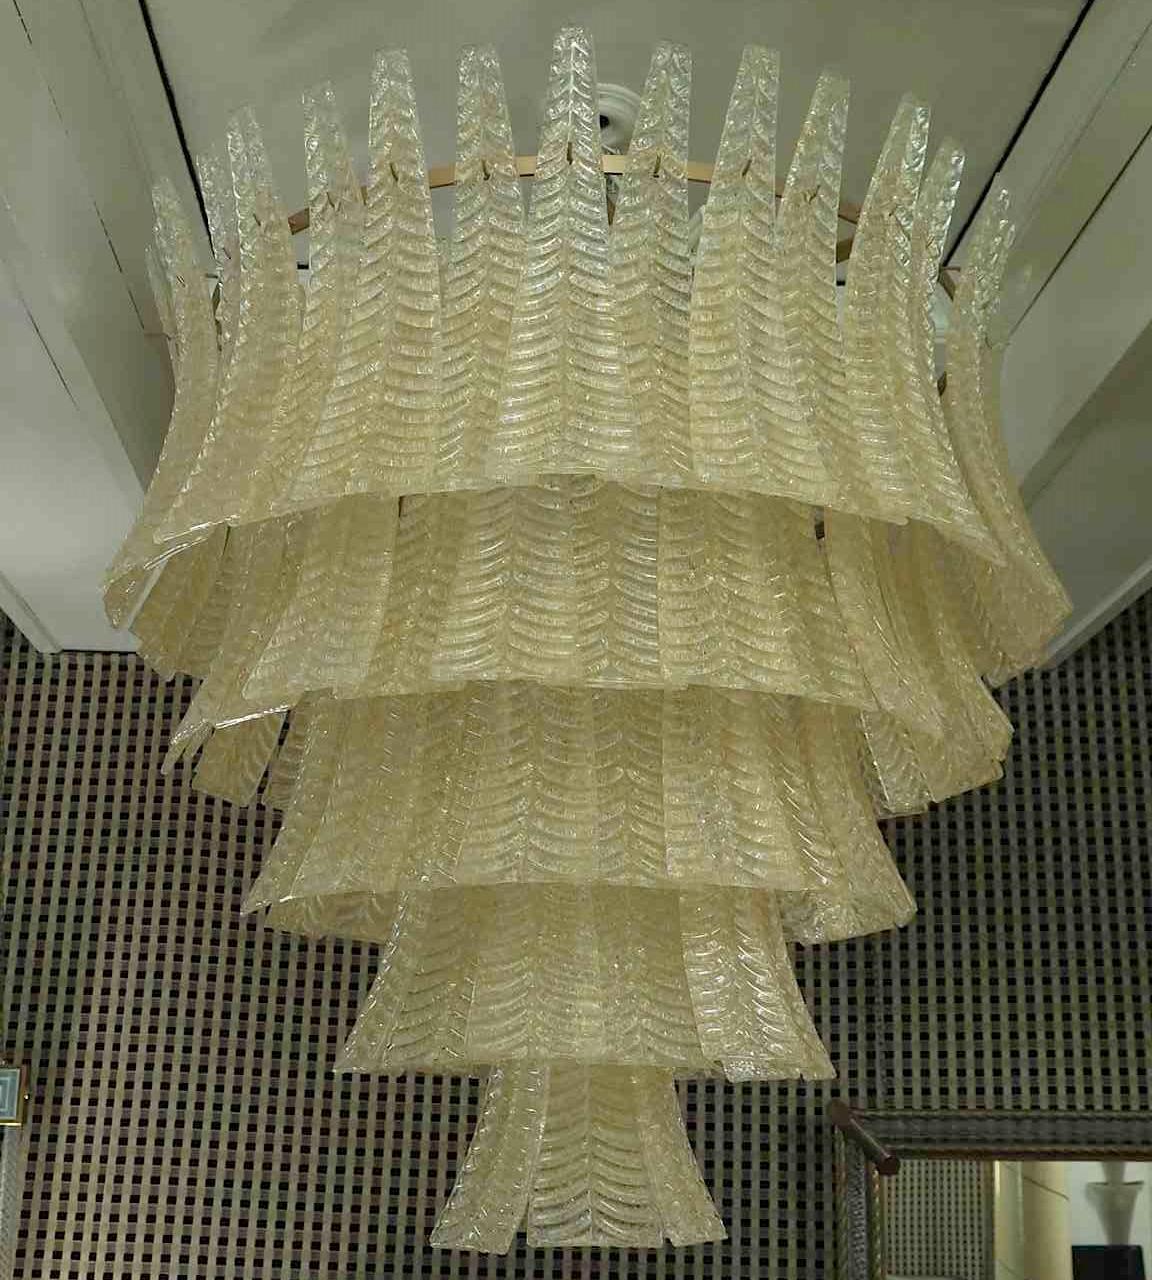 Classic circular Murano chandelier with large gold-colored 